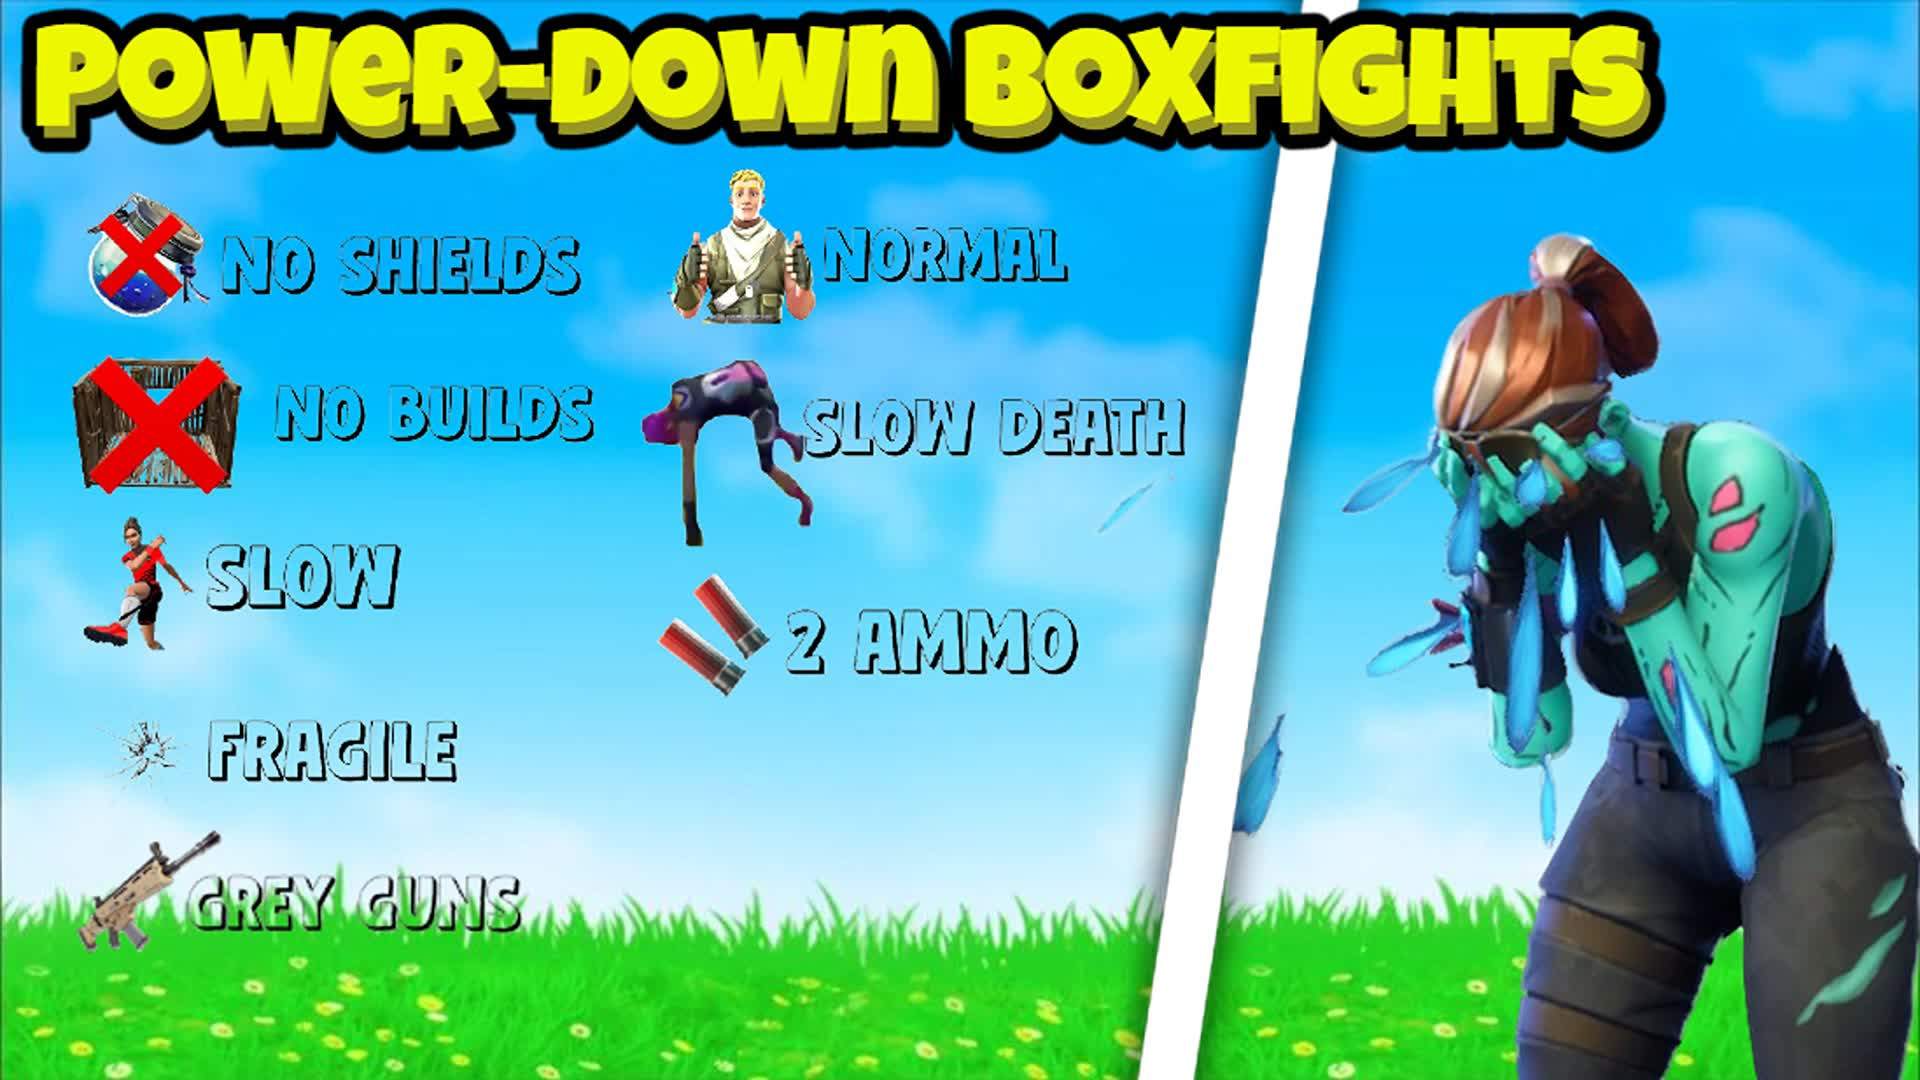 Box fights But with Power-Downs